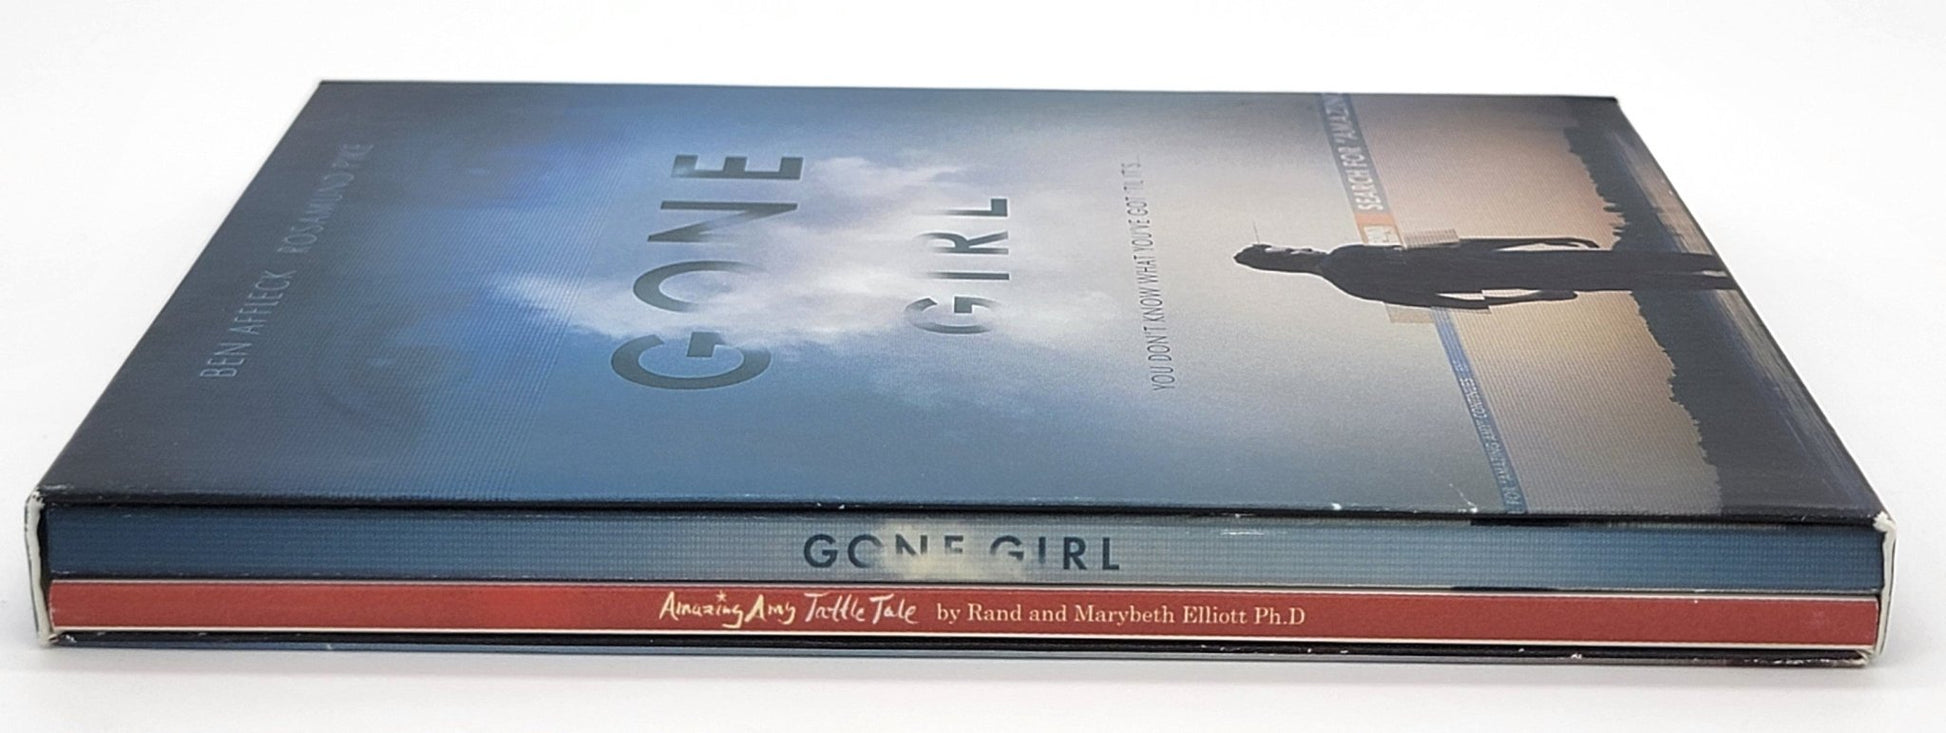 20th Century Fox Home Entertainment - Gone Girl | DVD & Collector's Book Amazing Amy Tattle Tale - DVD - Steady Bunny Shop